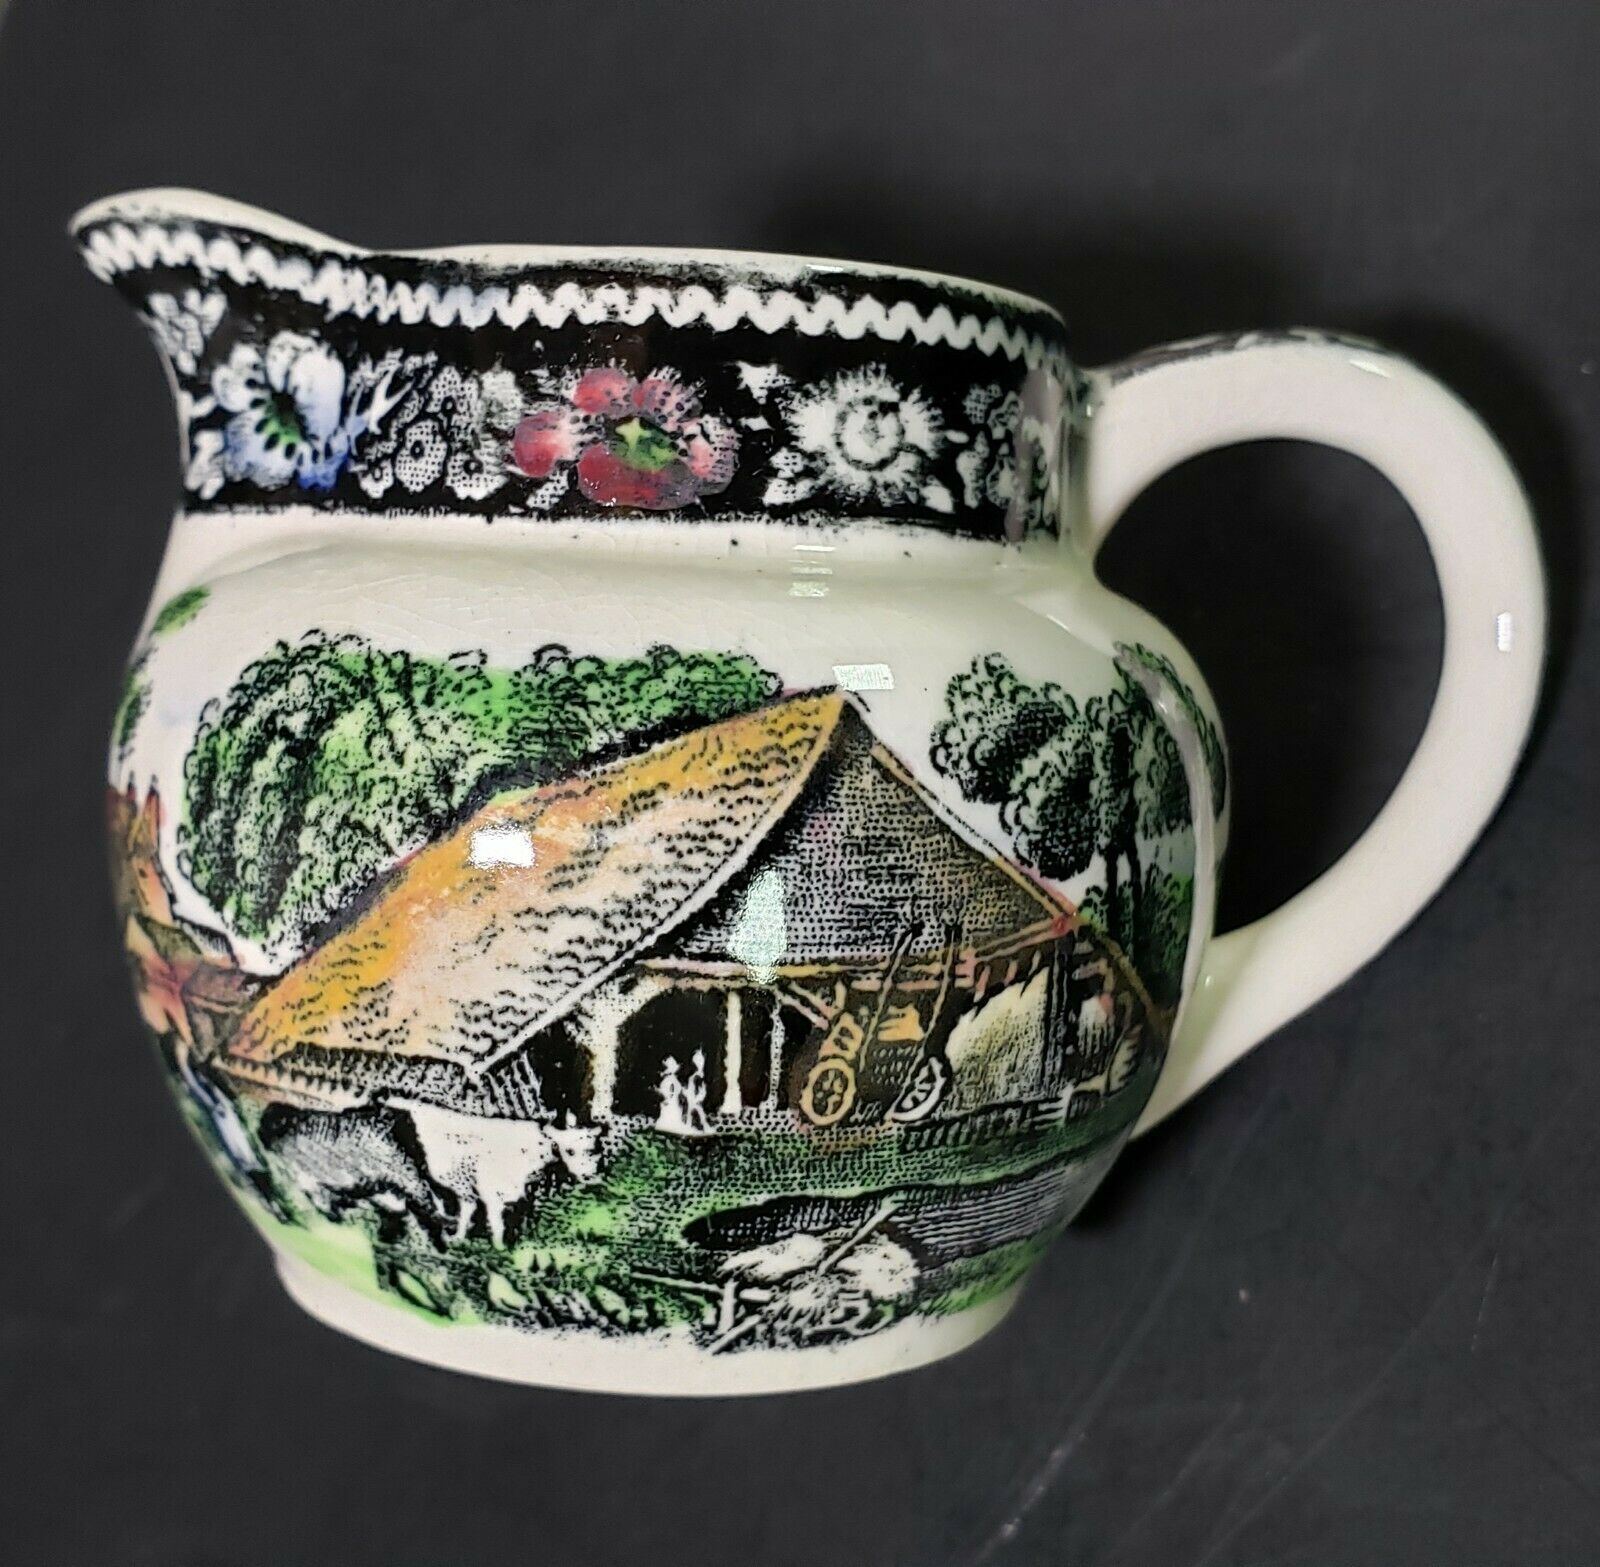 1910-1932 Wr Midwinter Rural England Hand Painted Transfer Mini Ceramic Pitcher